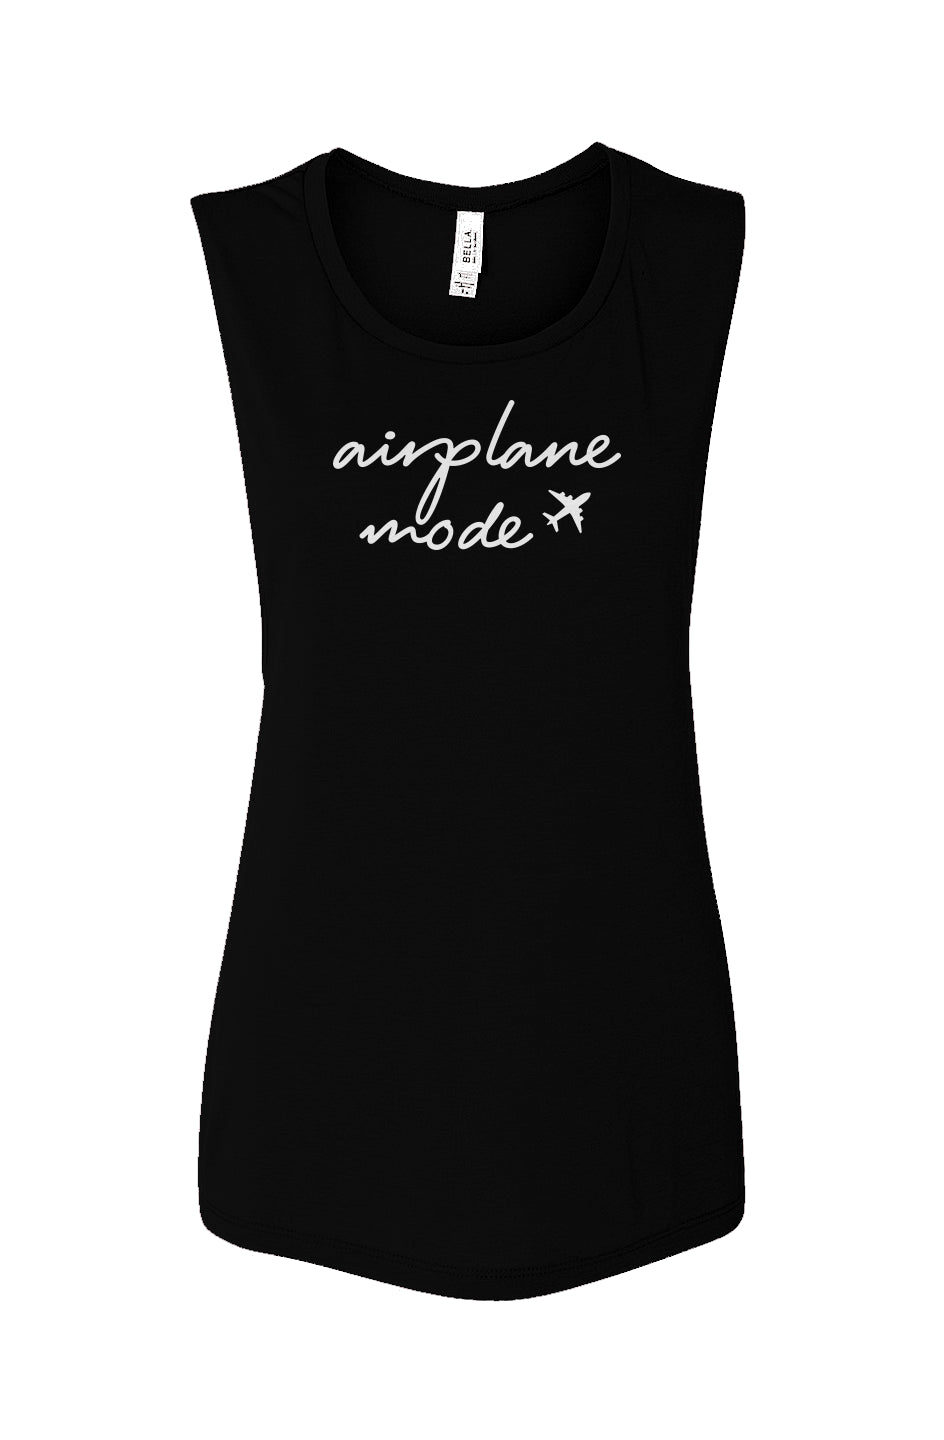 Airplane Mode Womens Muscle Tank